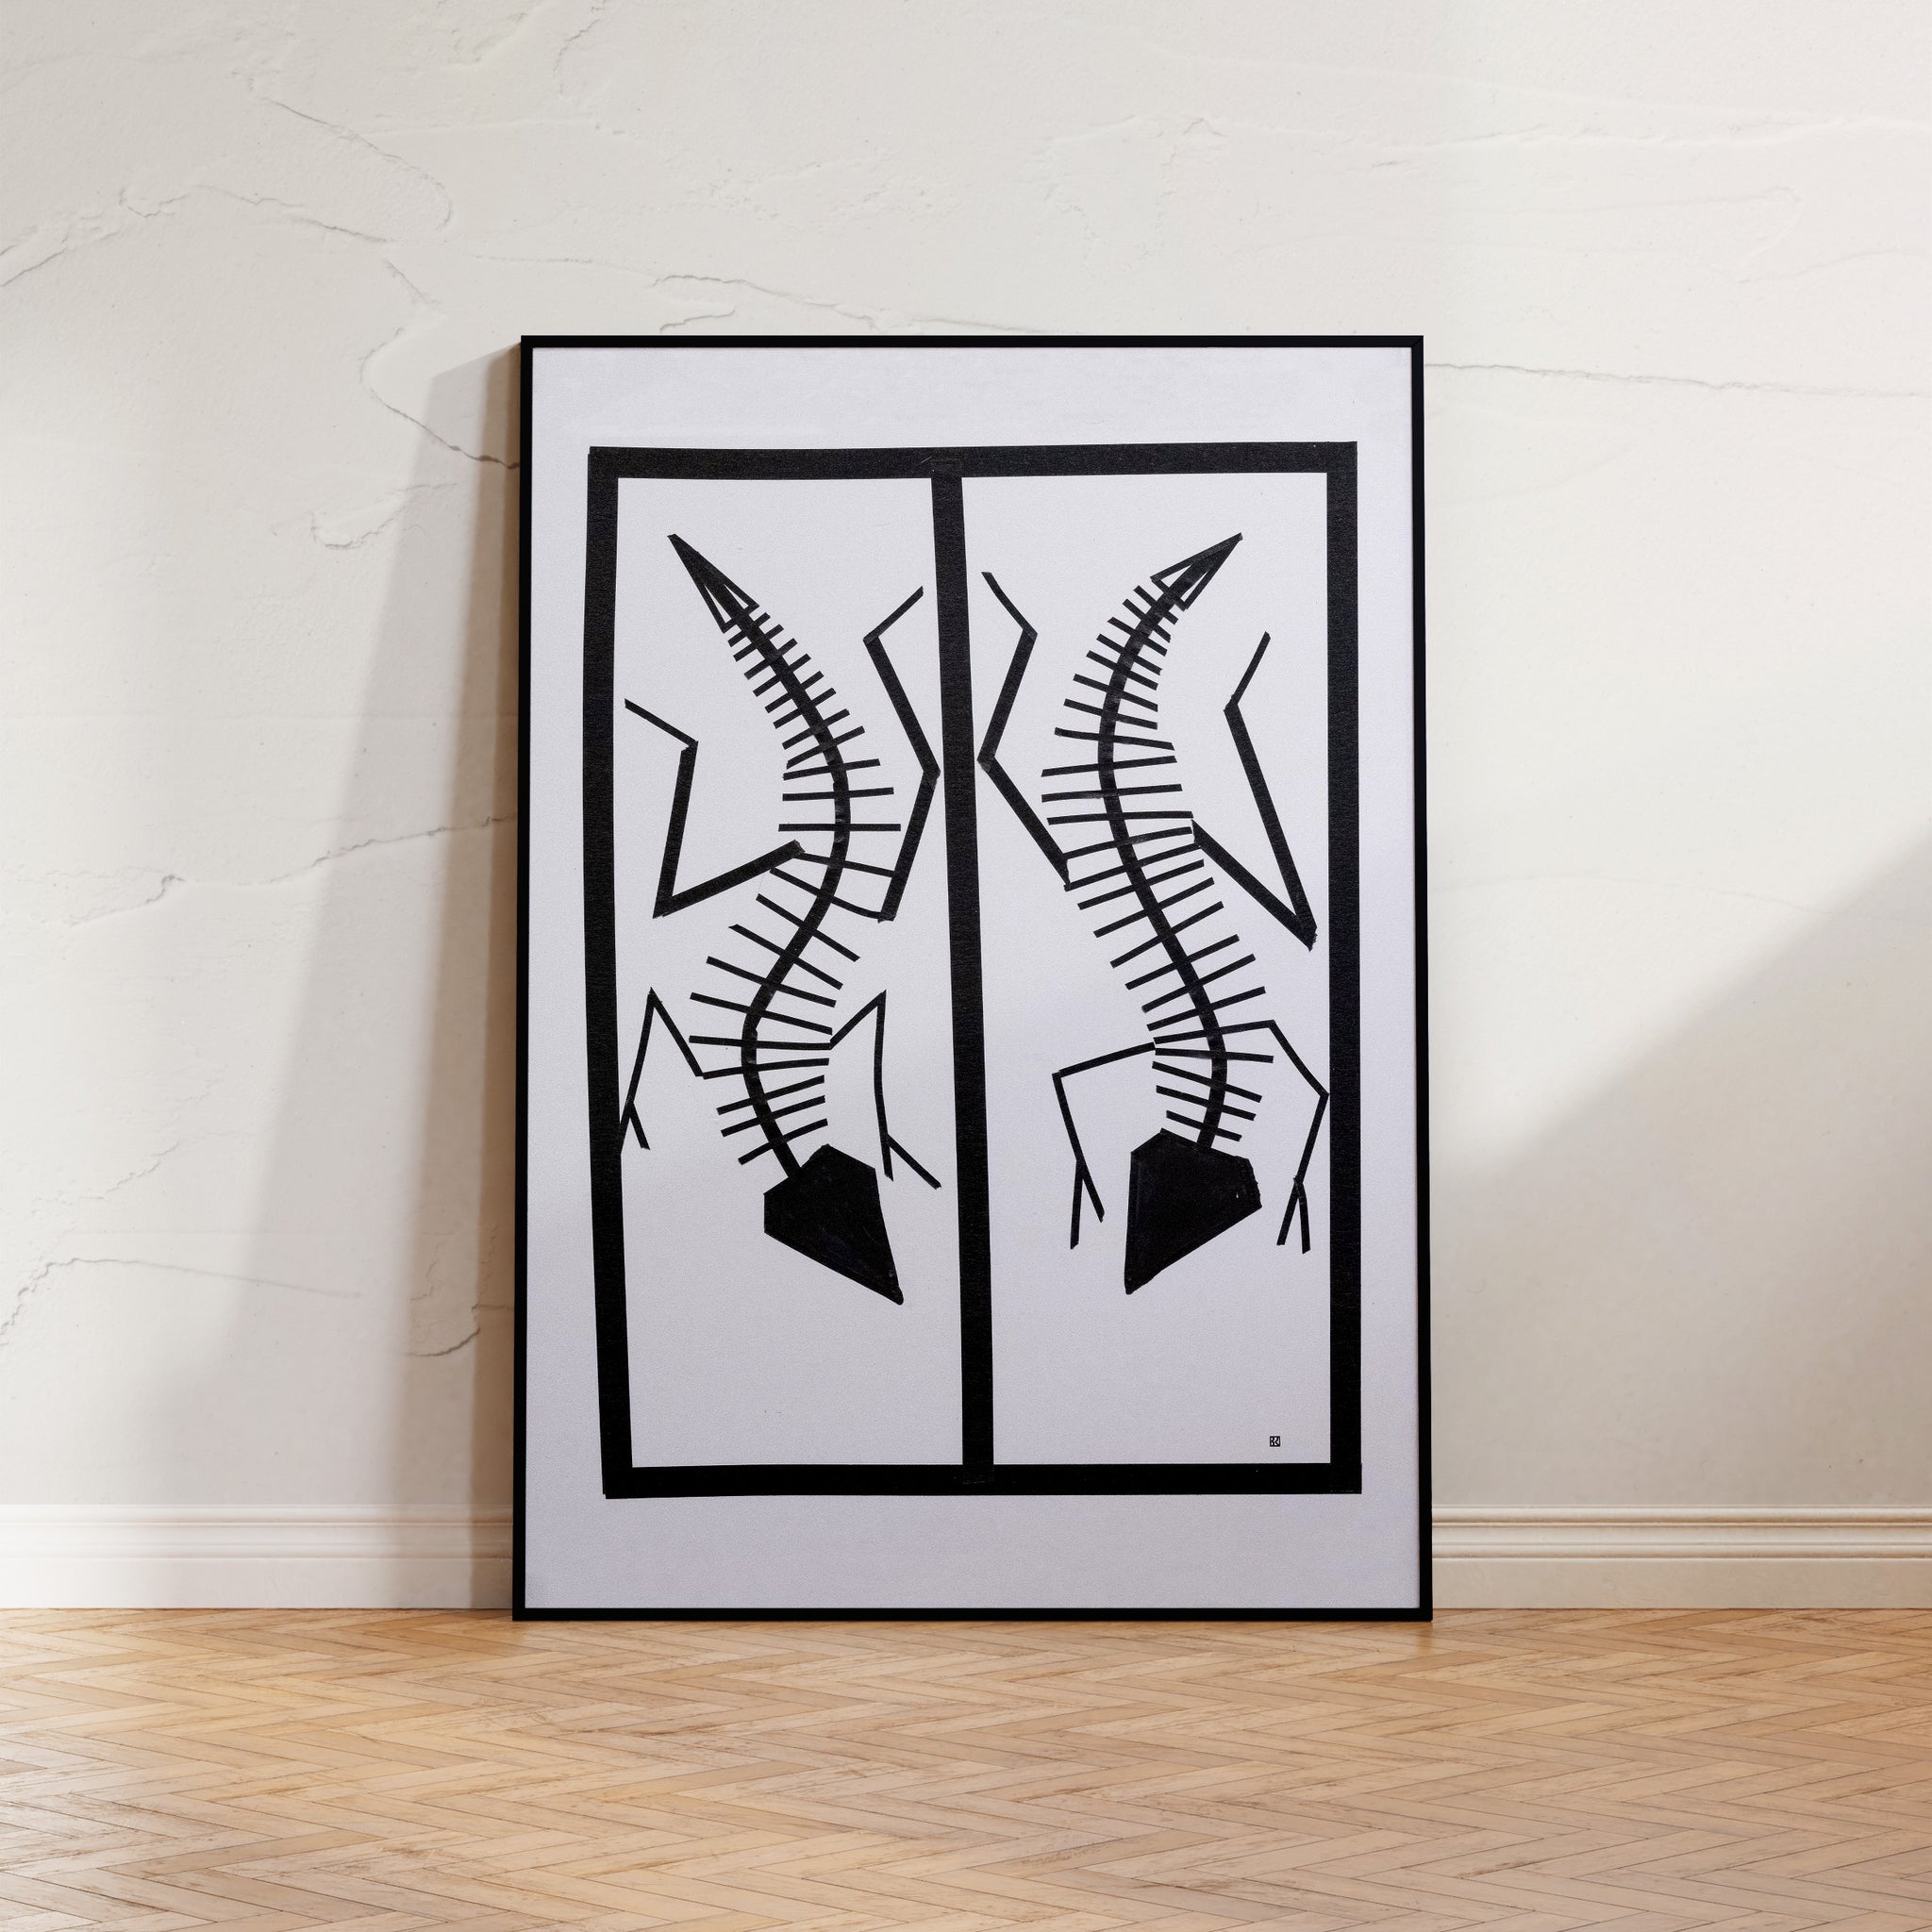 Monochromatic poster 'Sinuous Swirls' by Brian Findleton, presenting two fluid, elongated lizard forms captured through minimalist, sinuous lines.